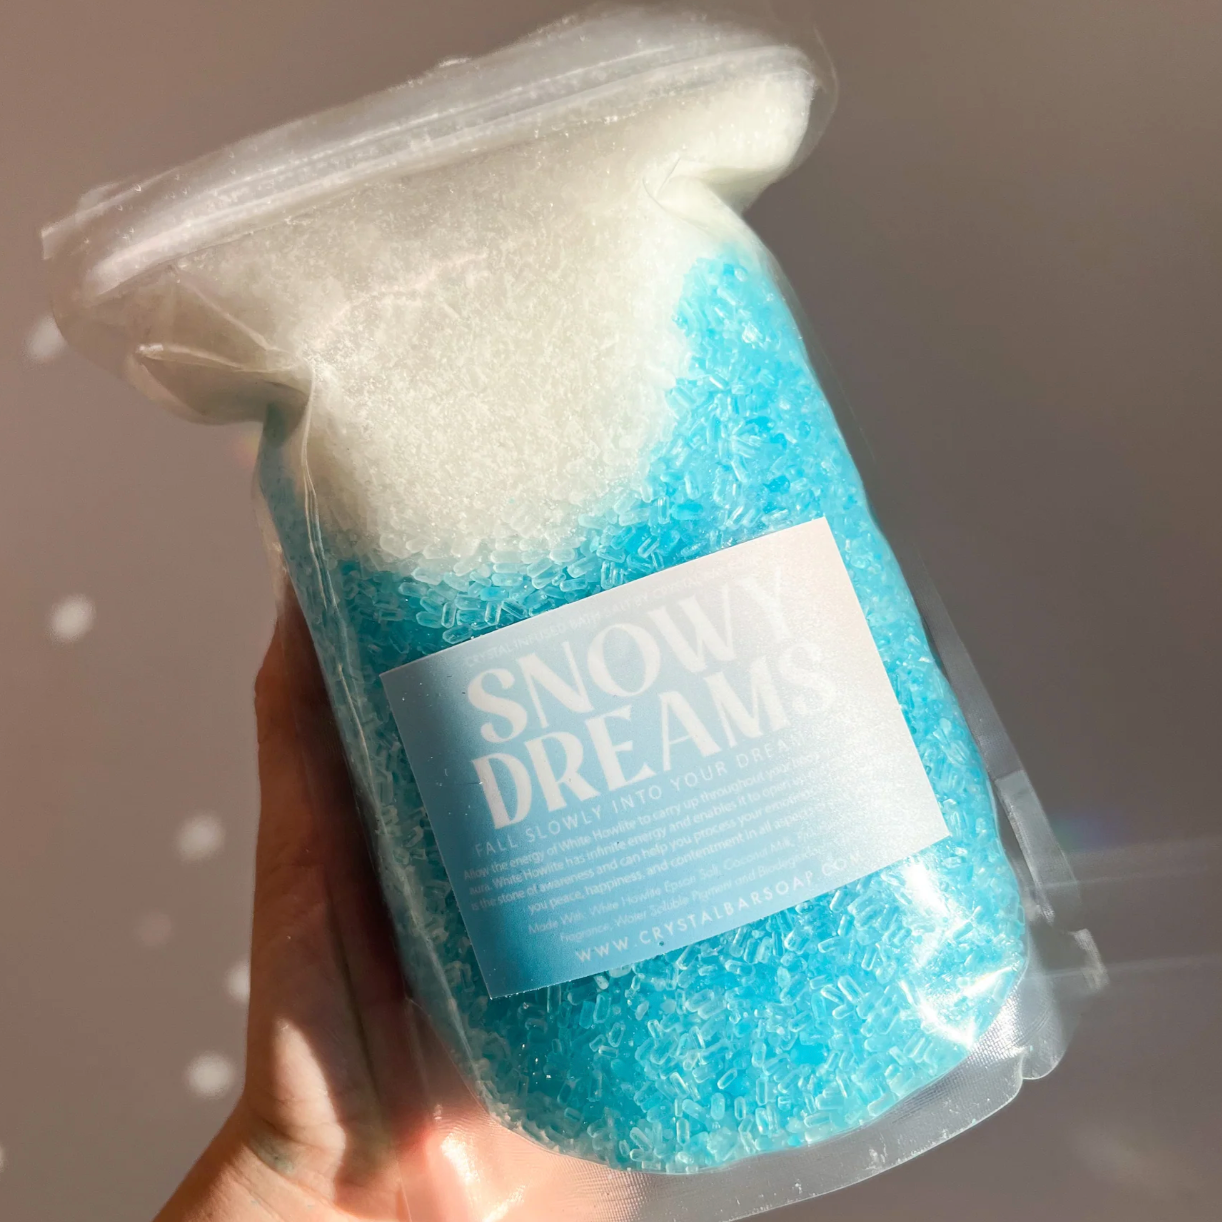 Winter Bliss: Embracing Tranquility with Snowy Dreams Bath Salt from Crystal Bar Soap